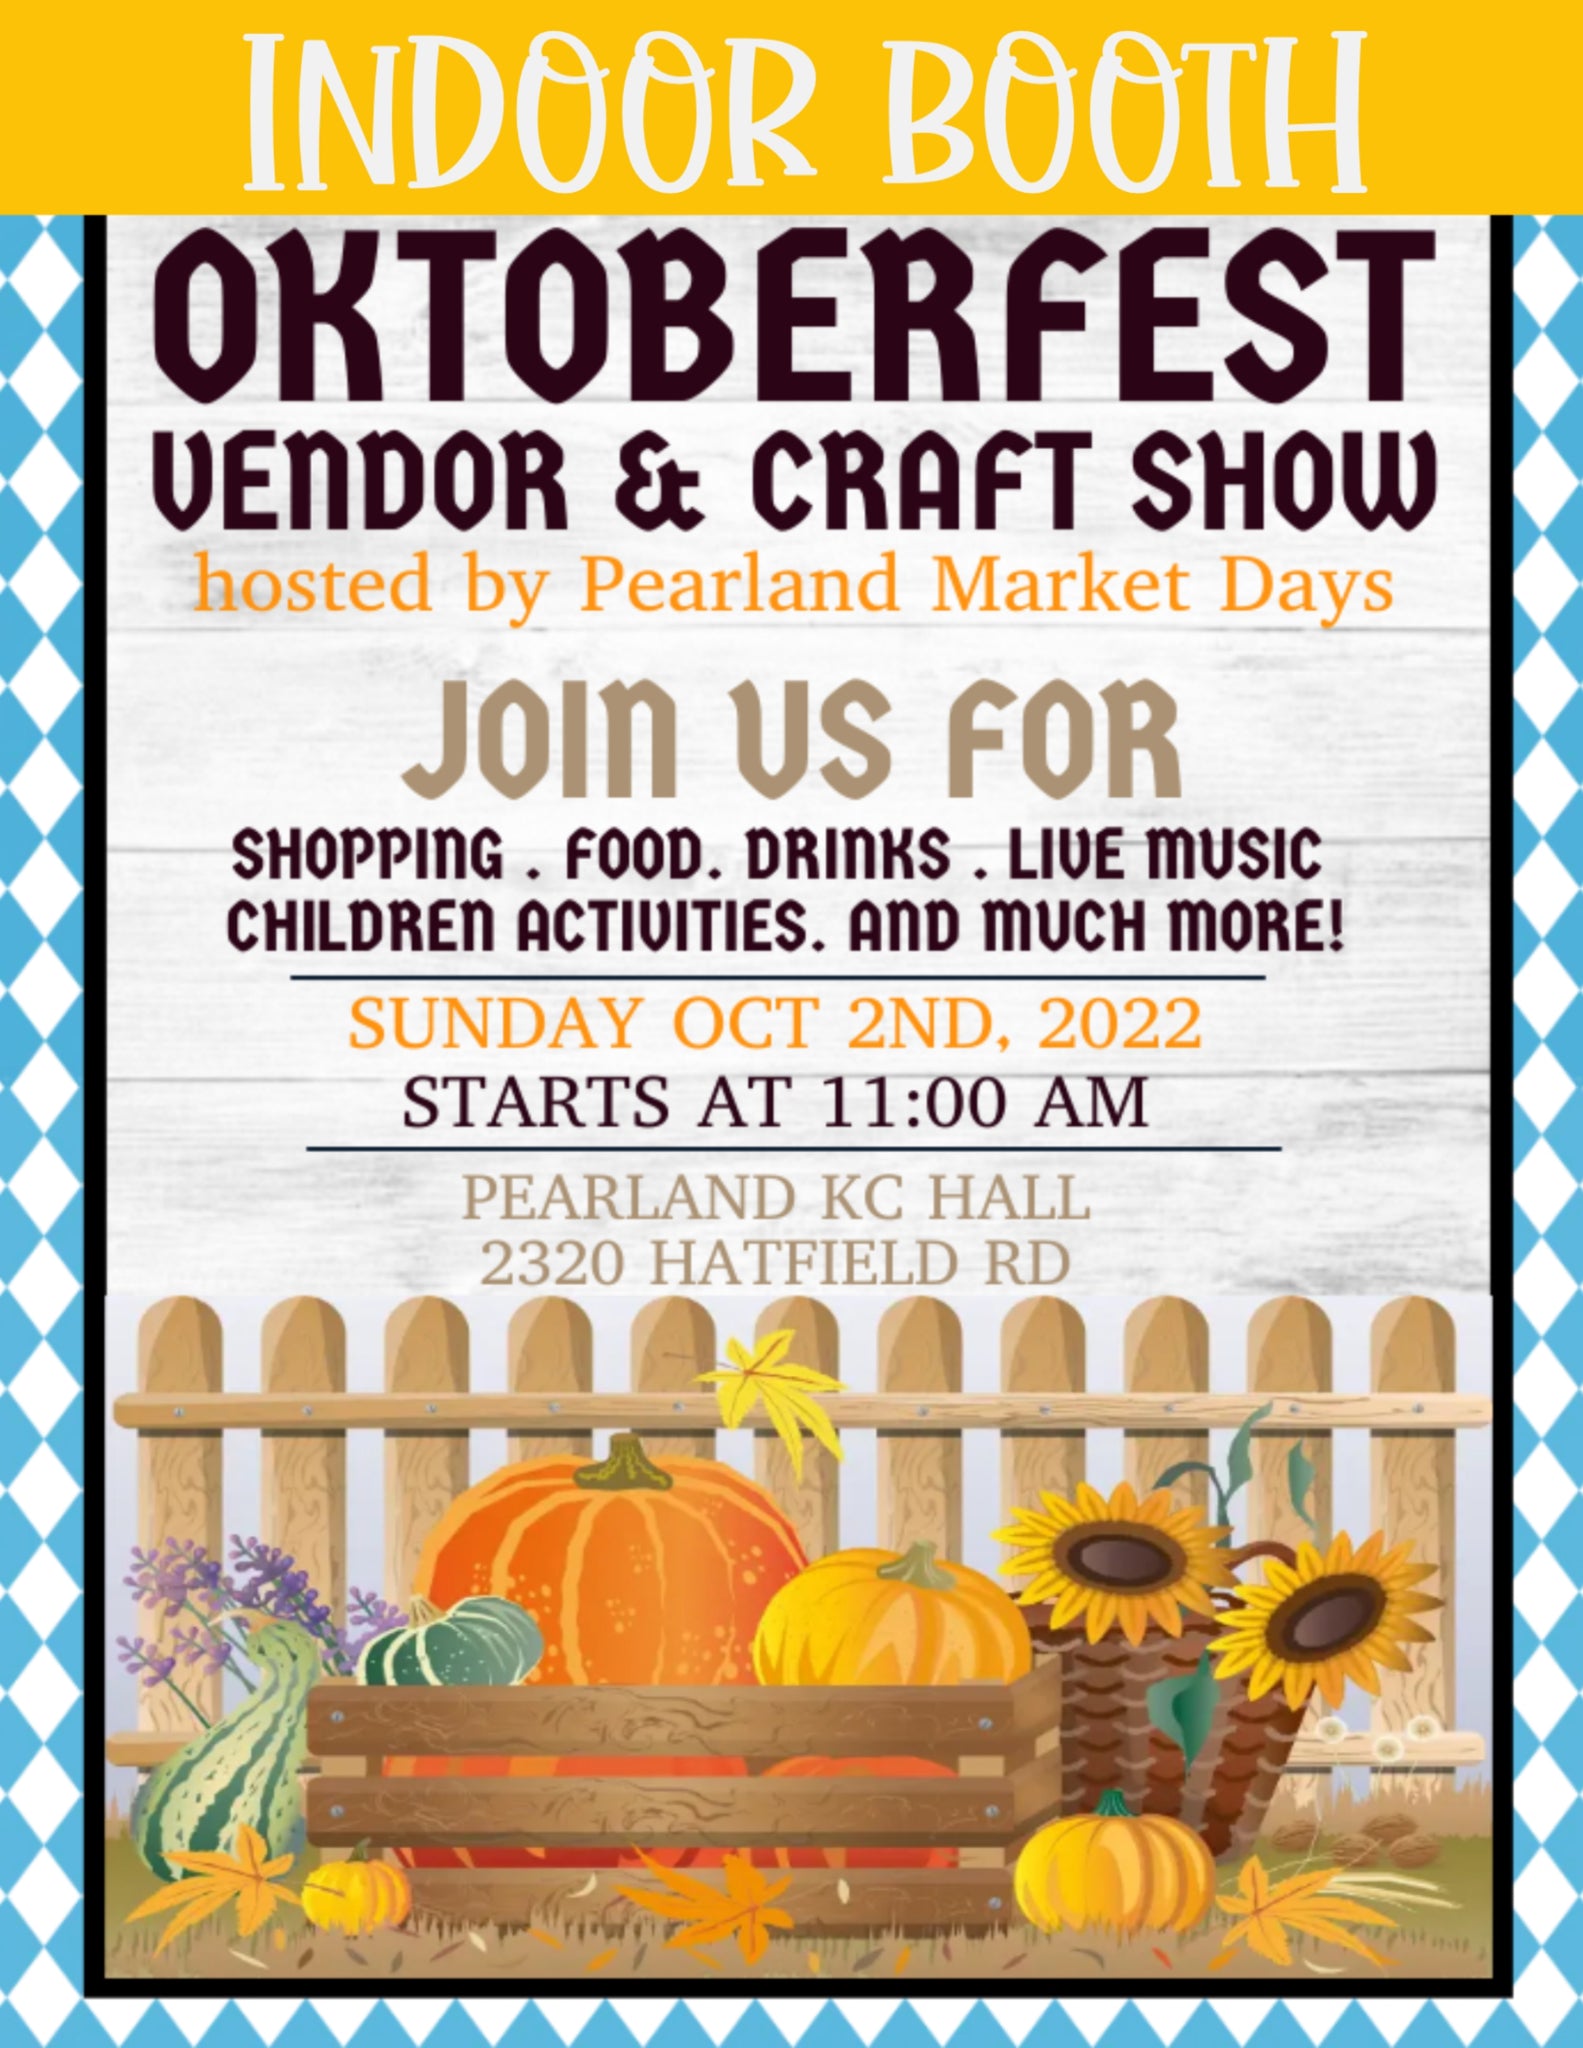 PEARLAND Sunday October 2, 2022 - INDOOR BOOTH